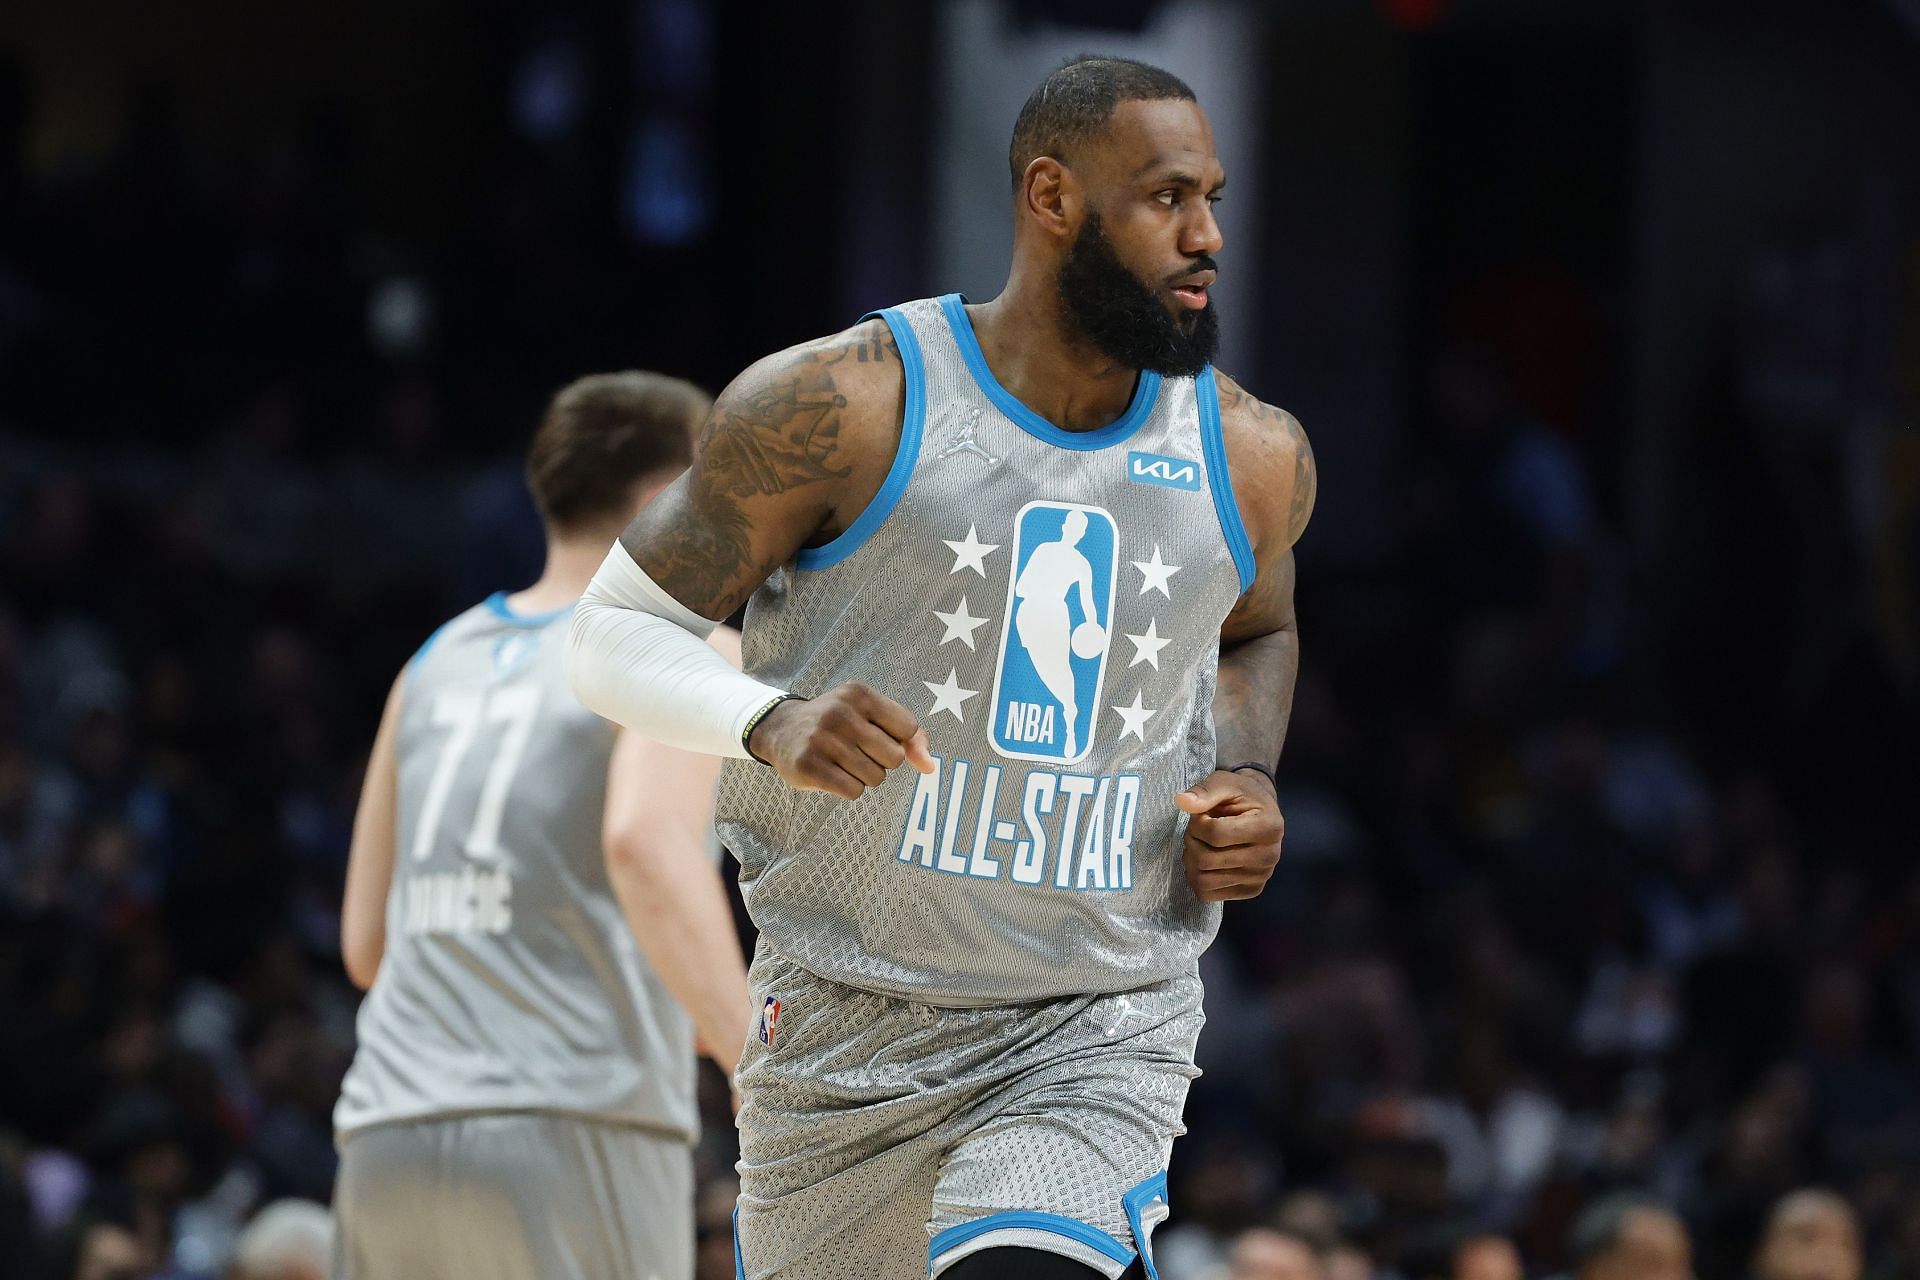 LeBron James (#6) during the 2022 NBA All-Star Game